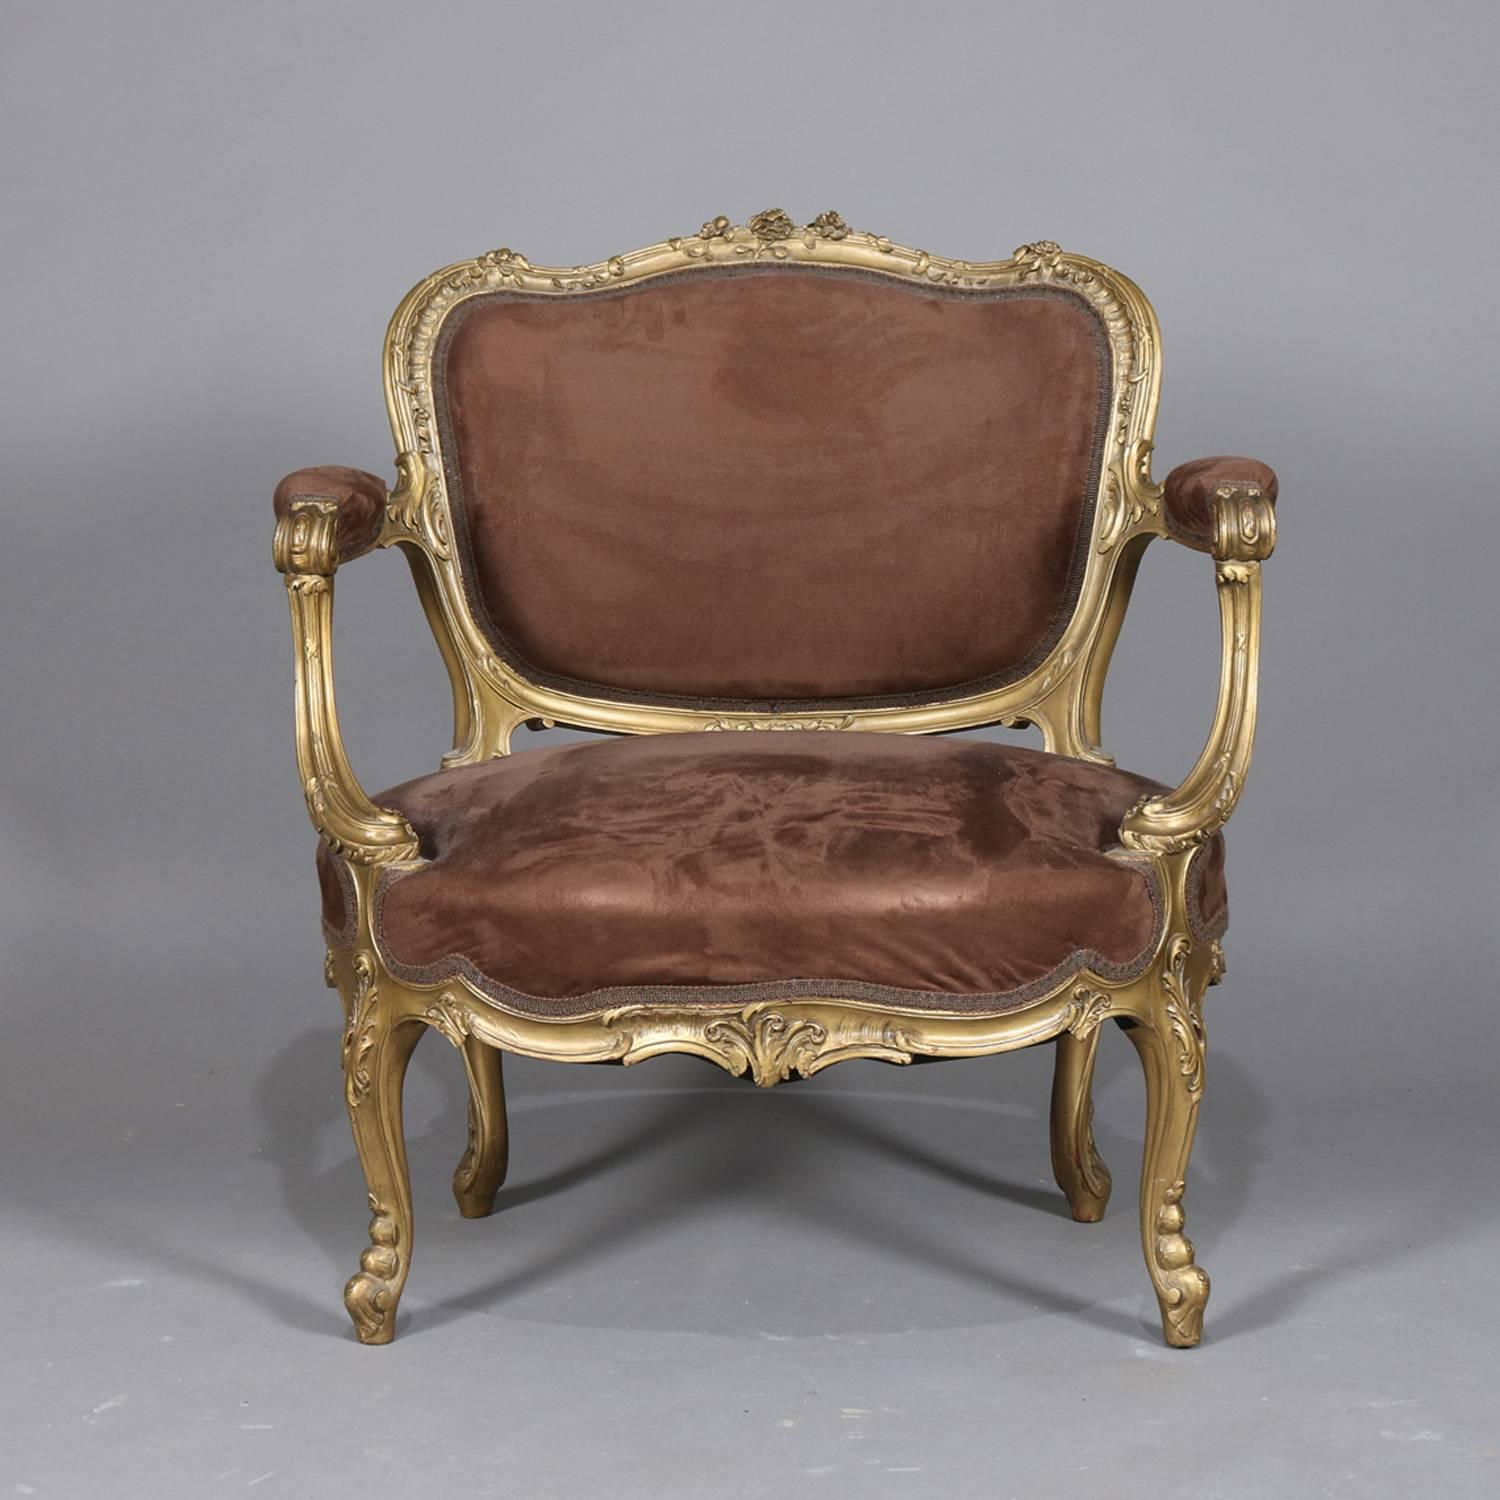 Antique French Louis XV oversized fauteuil features foliate, floral and scroll giltwood frame with upholstered seat, arms and back, sized at that of diminutive settee (seat and 1/2), 19th century


Measures: 33.5